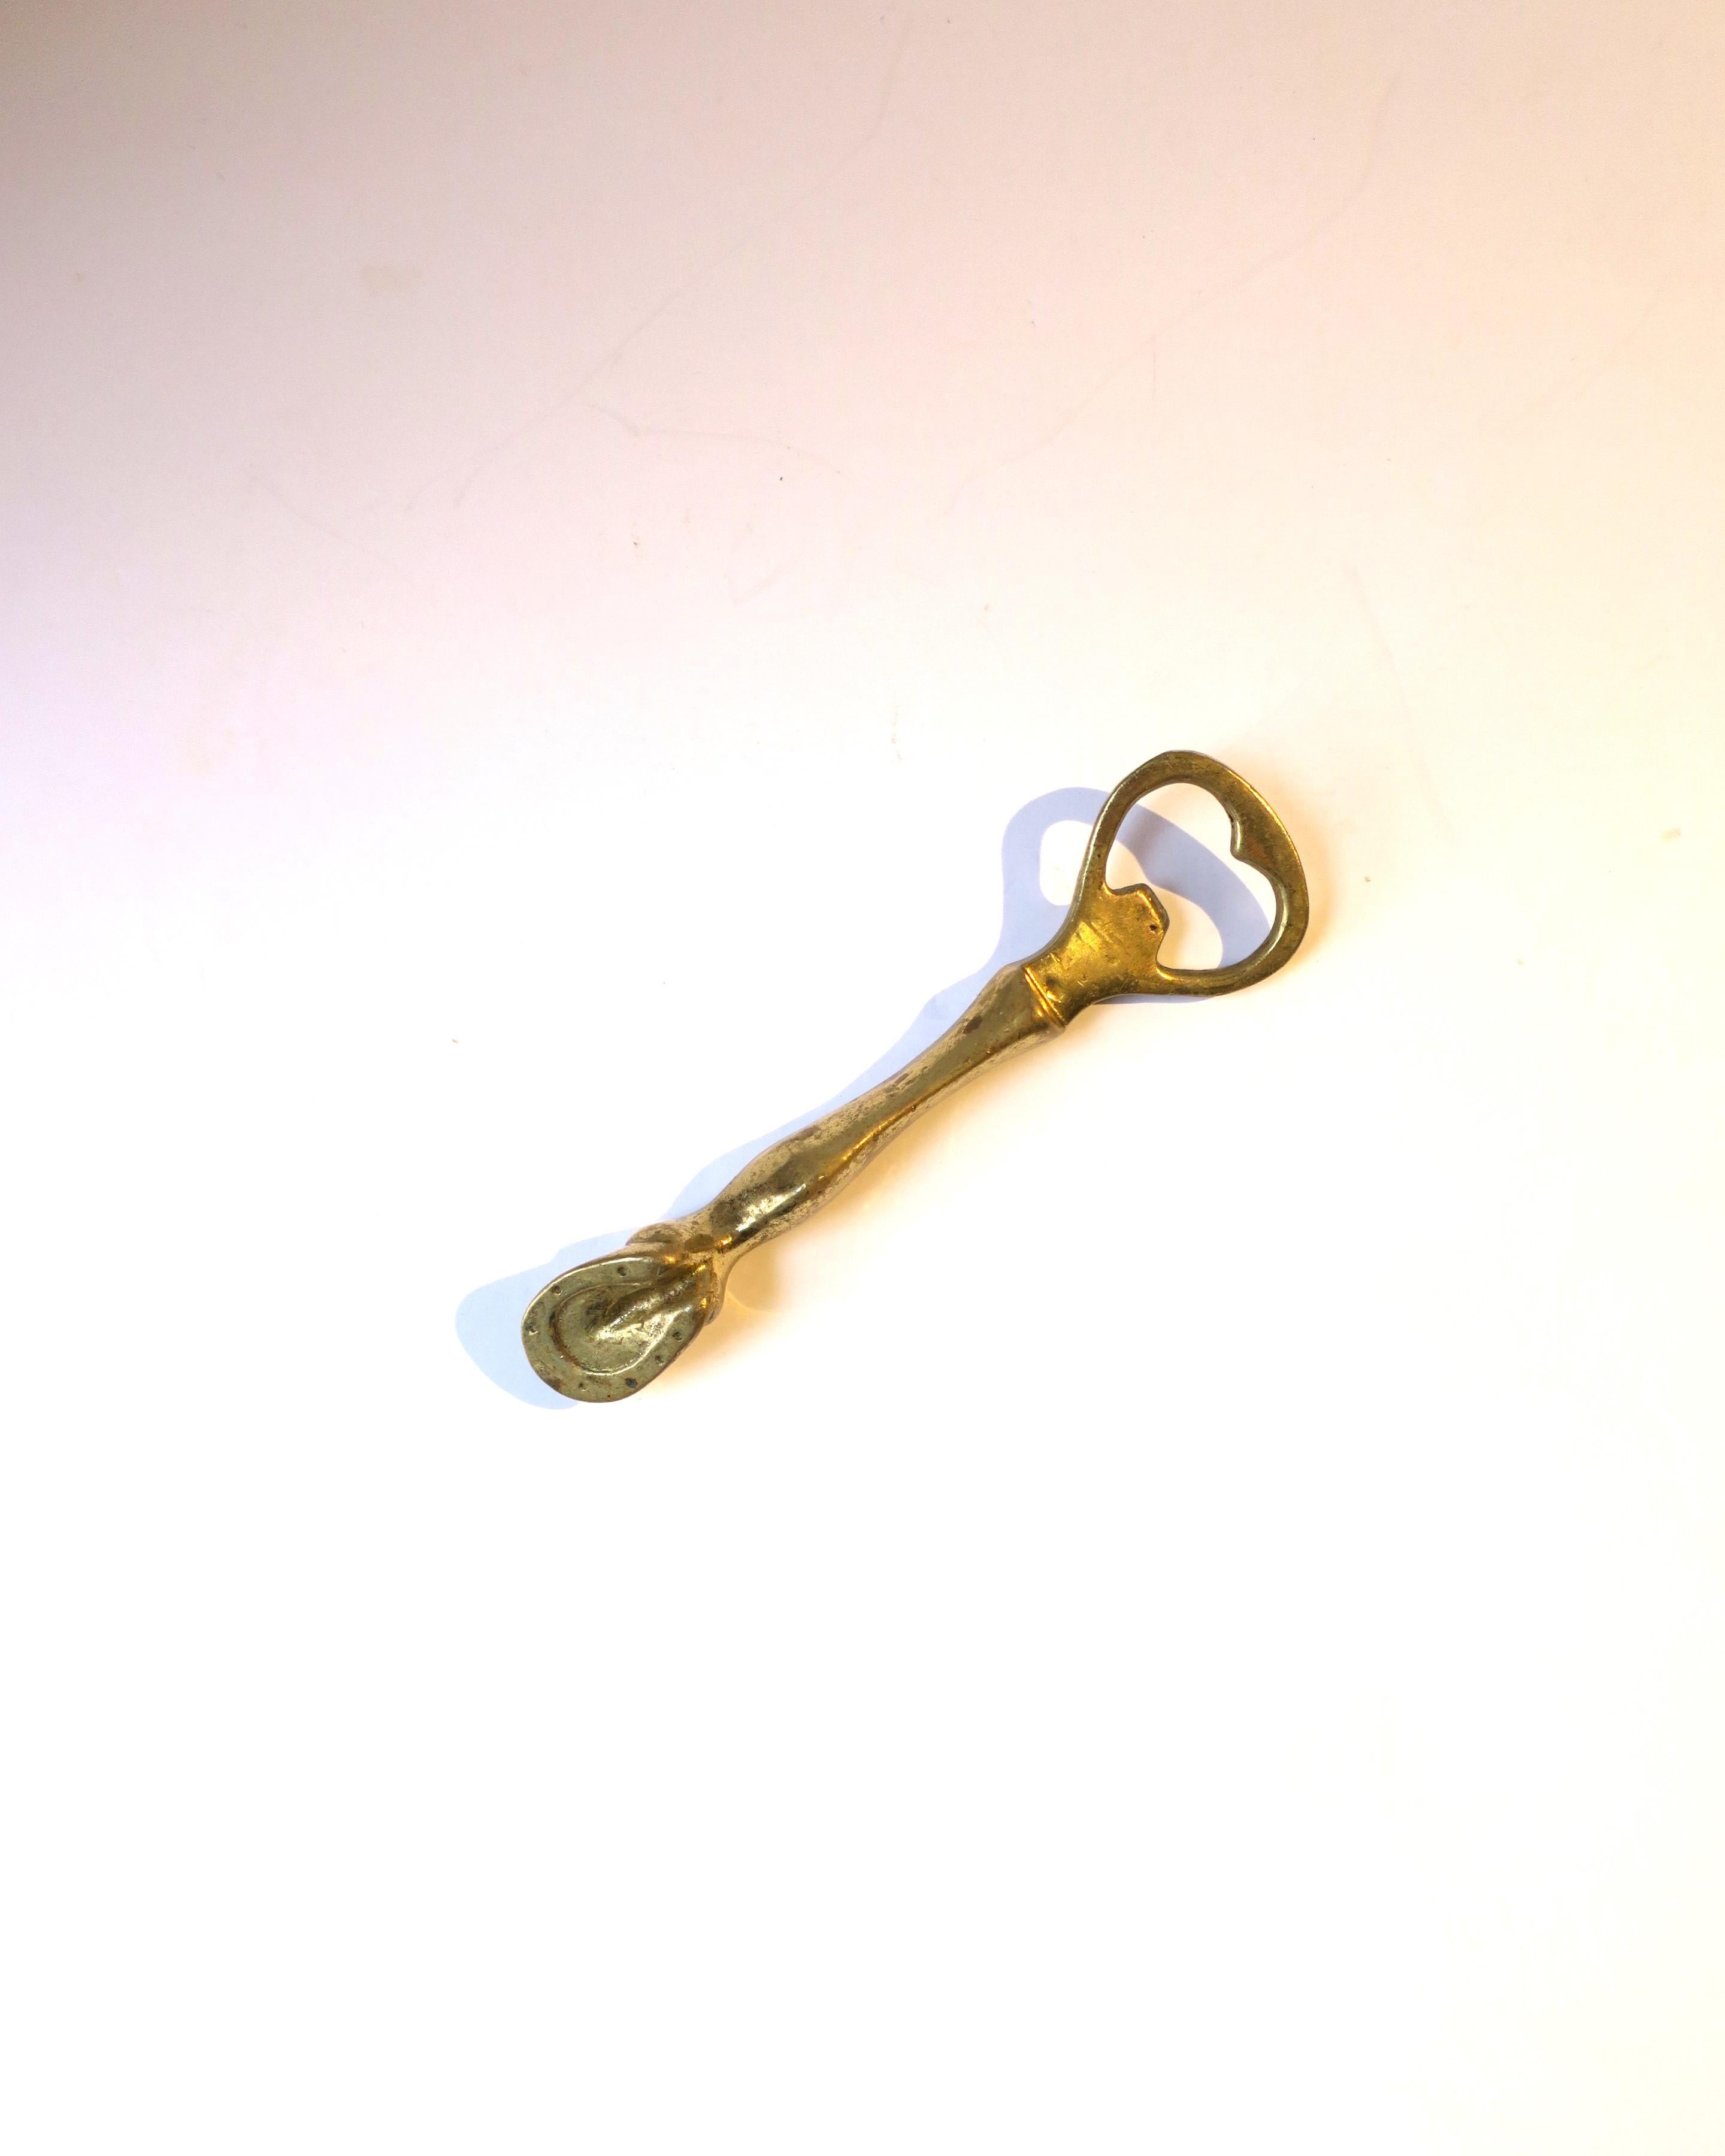 20th Century Brass Horse Hoof Bottle Opener in the Style of Gucci